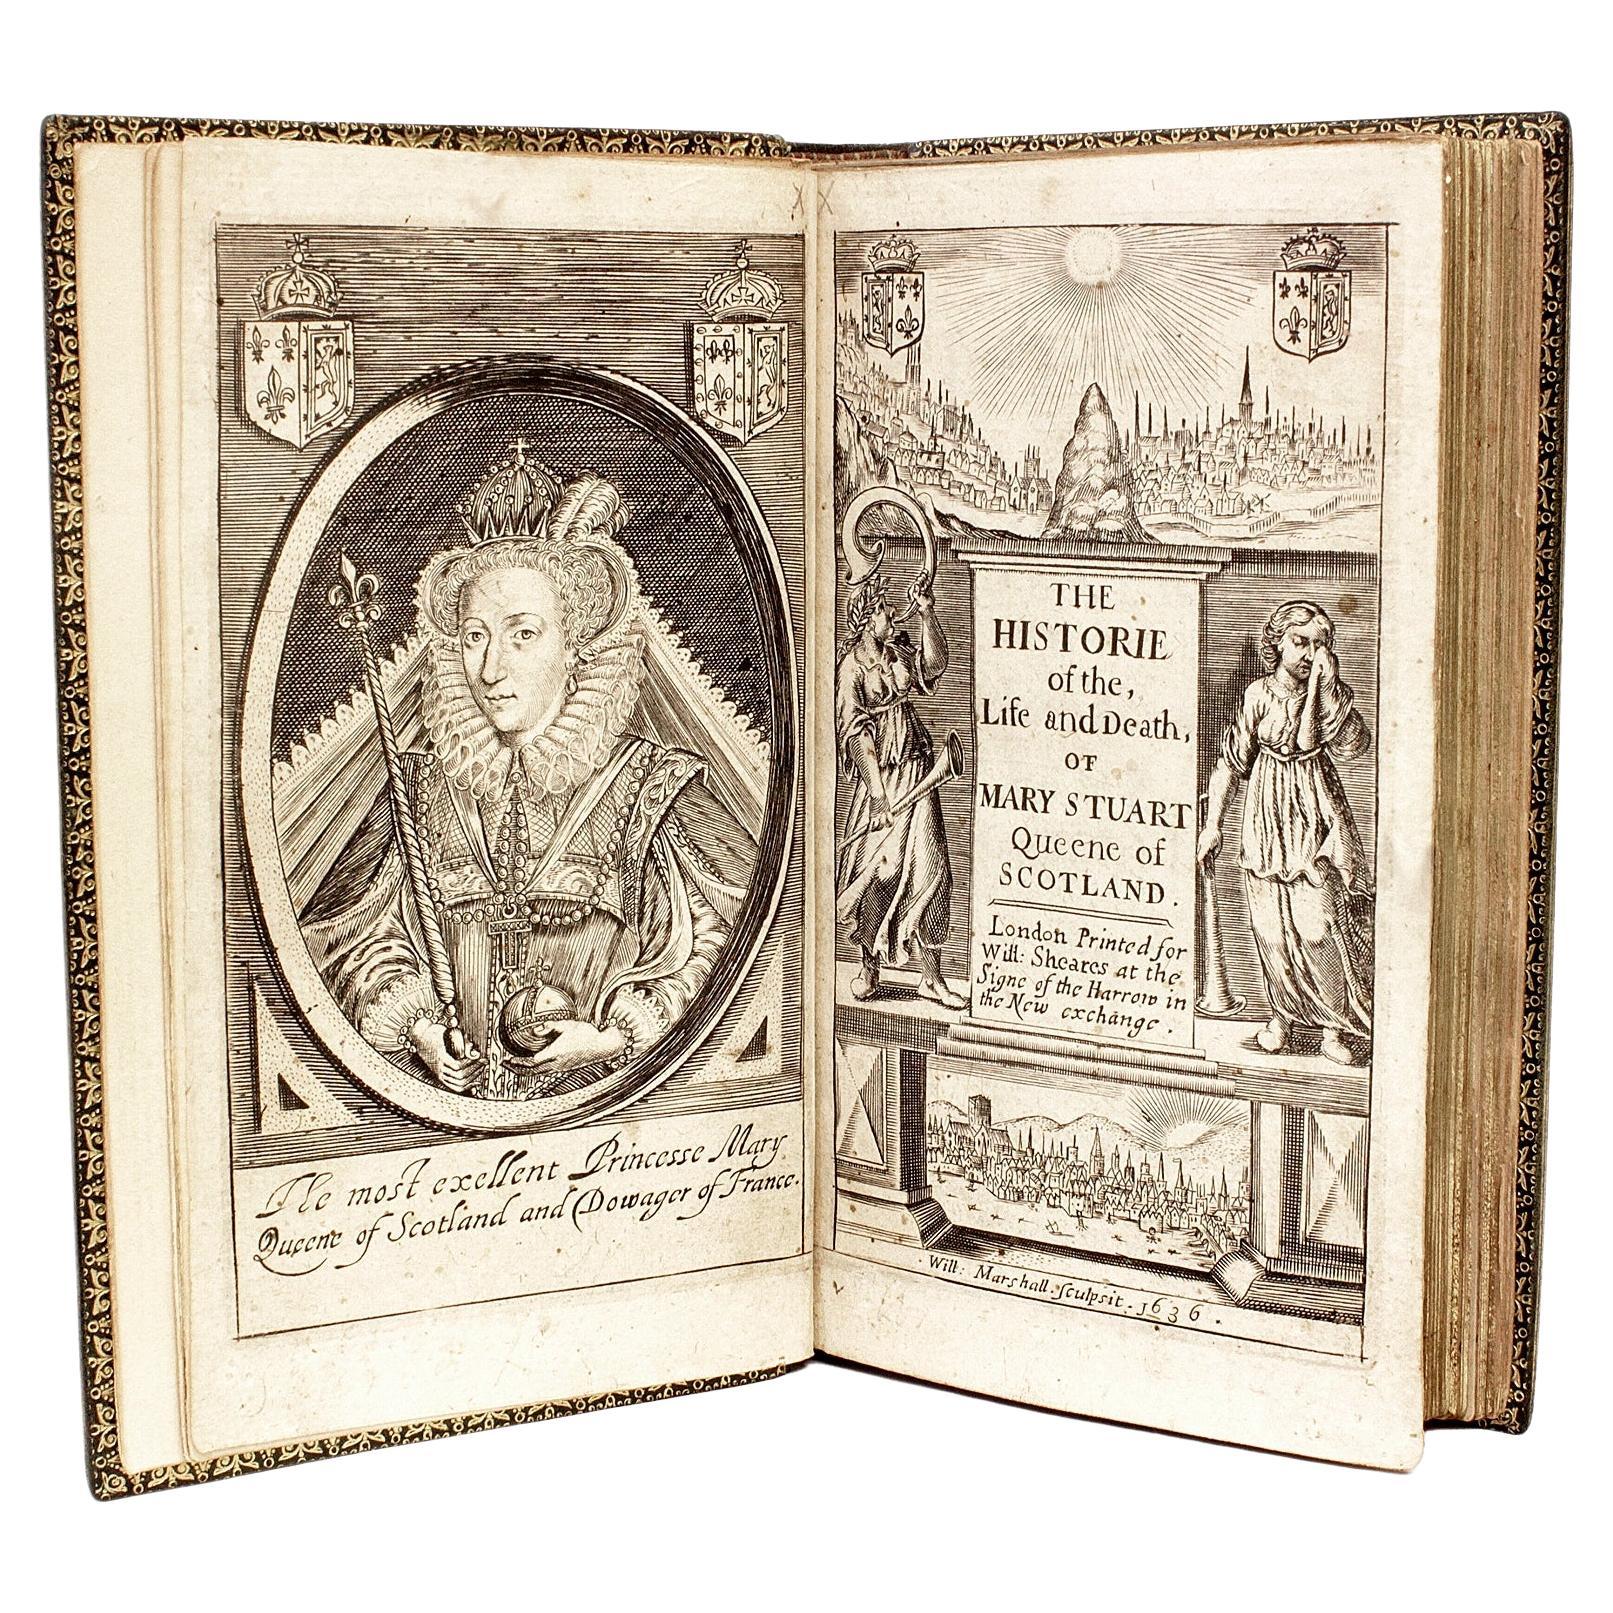 CAMDEN - The Historie of the Life & Death of Mary Stuart - SECOND EDITION - 1636 For Sale